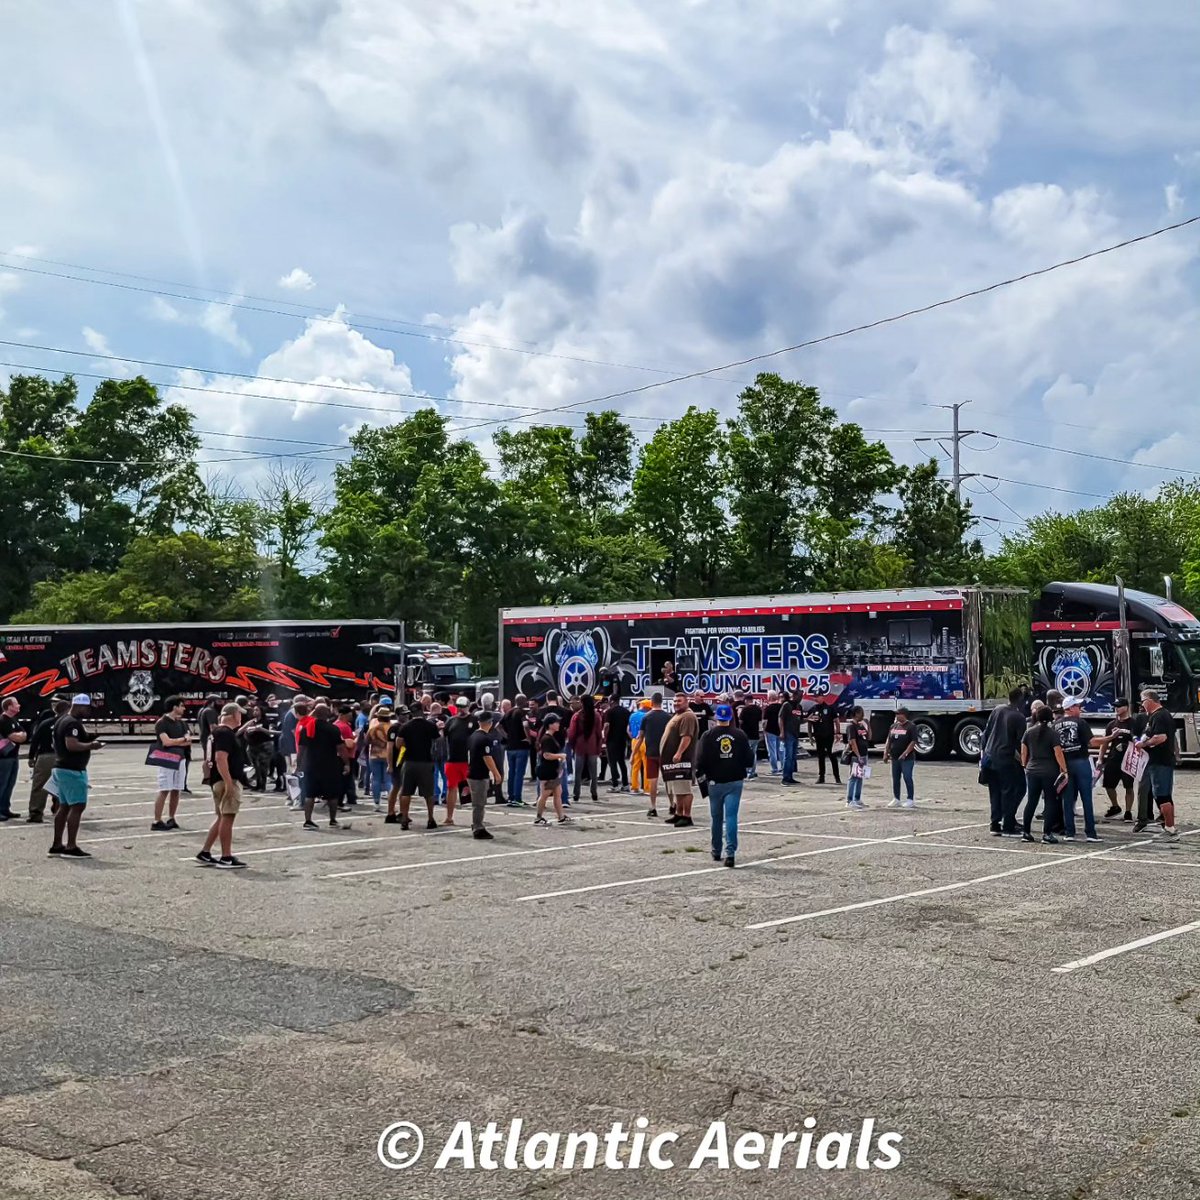 Had a great crowd and a great turnout for the Costco workers rally in Norfolk Virginia today. Shout out to the @teamsters and @teamsters822 for putting this event on and @TeamsterSOB For coming to our event #Unionstrong #1u #teamsterstrong #teamsters #Union